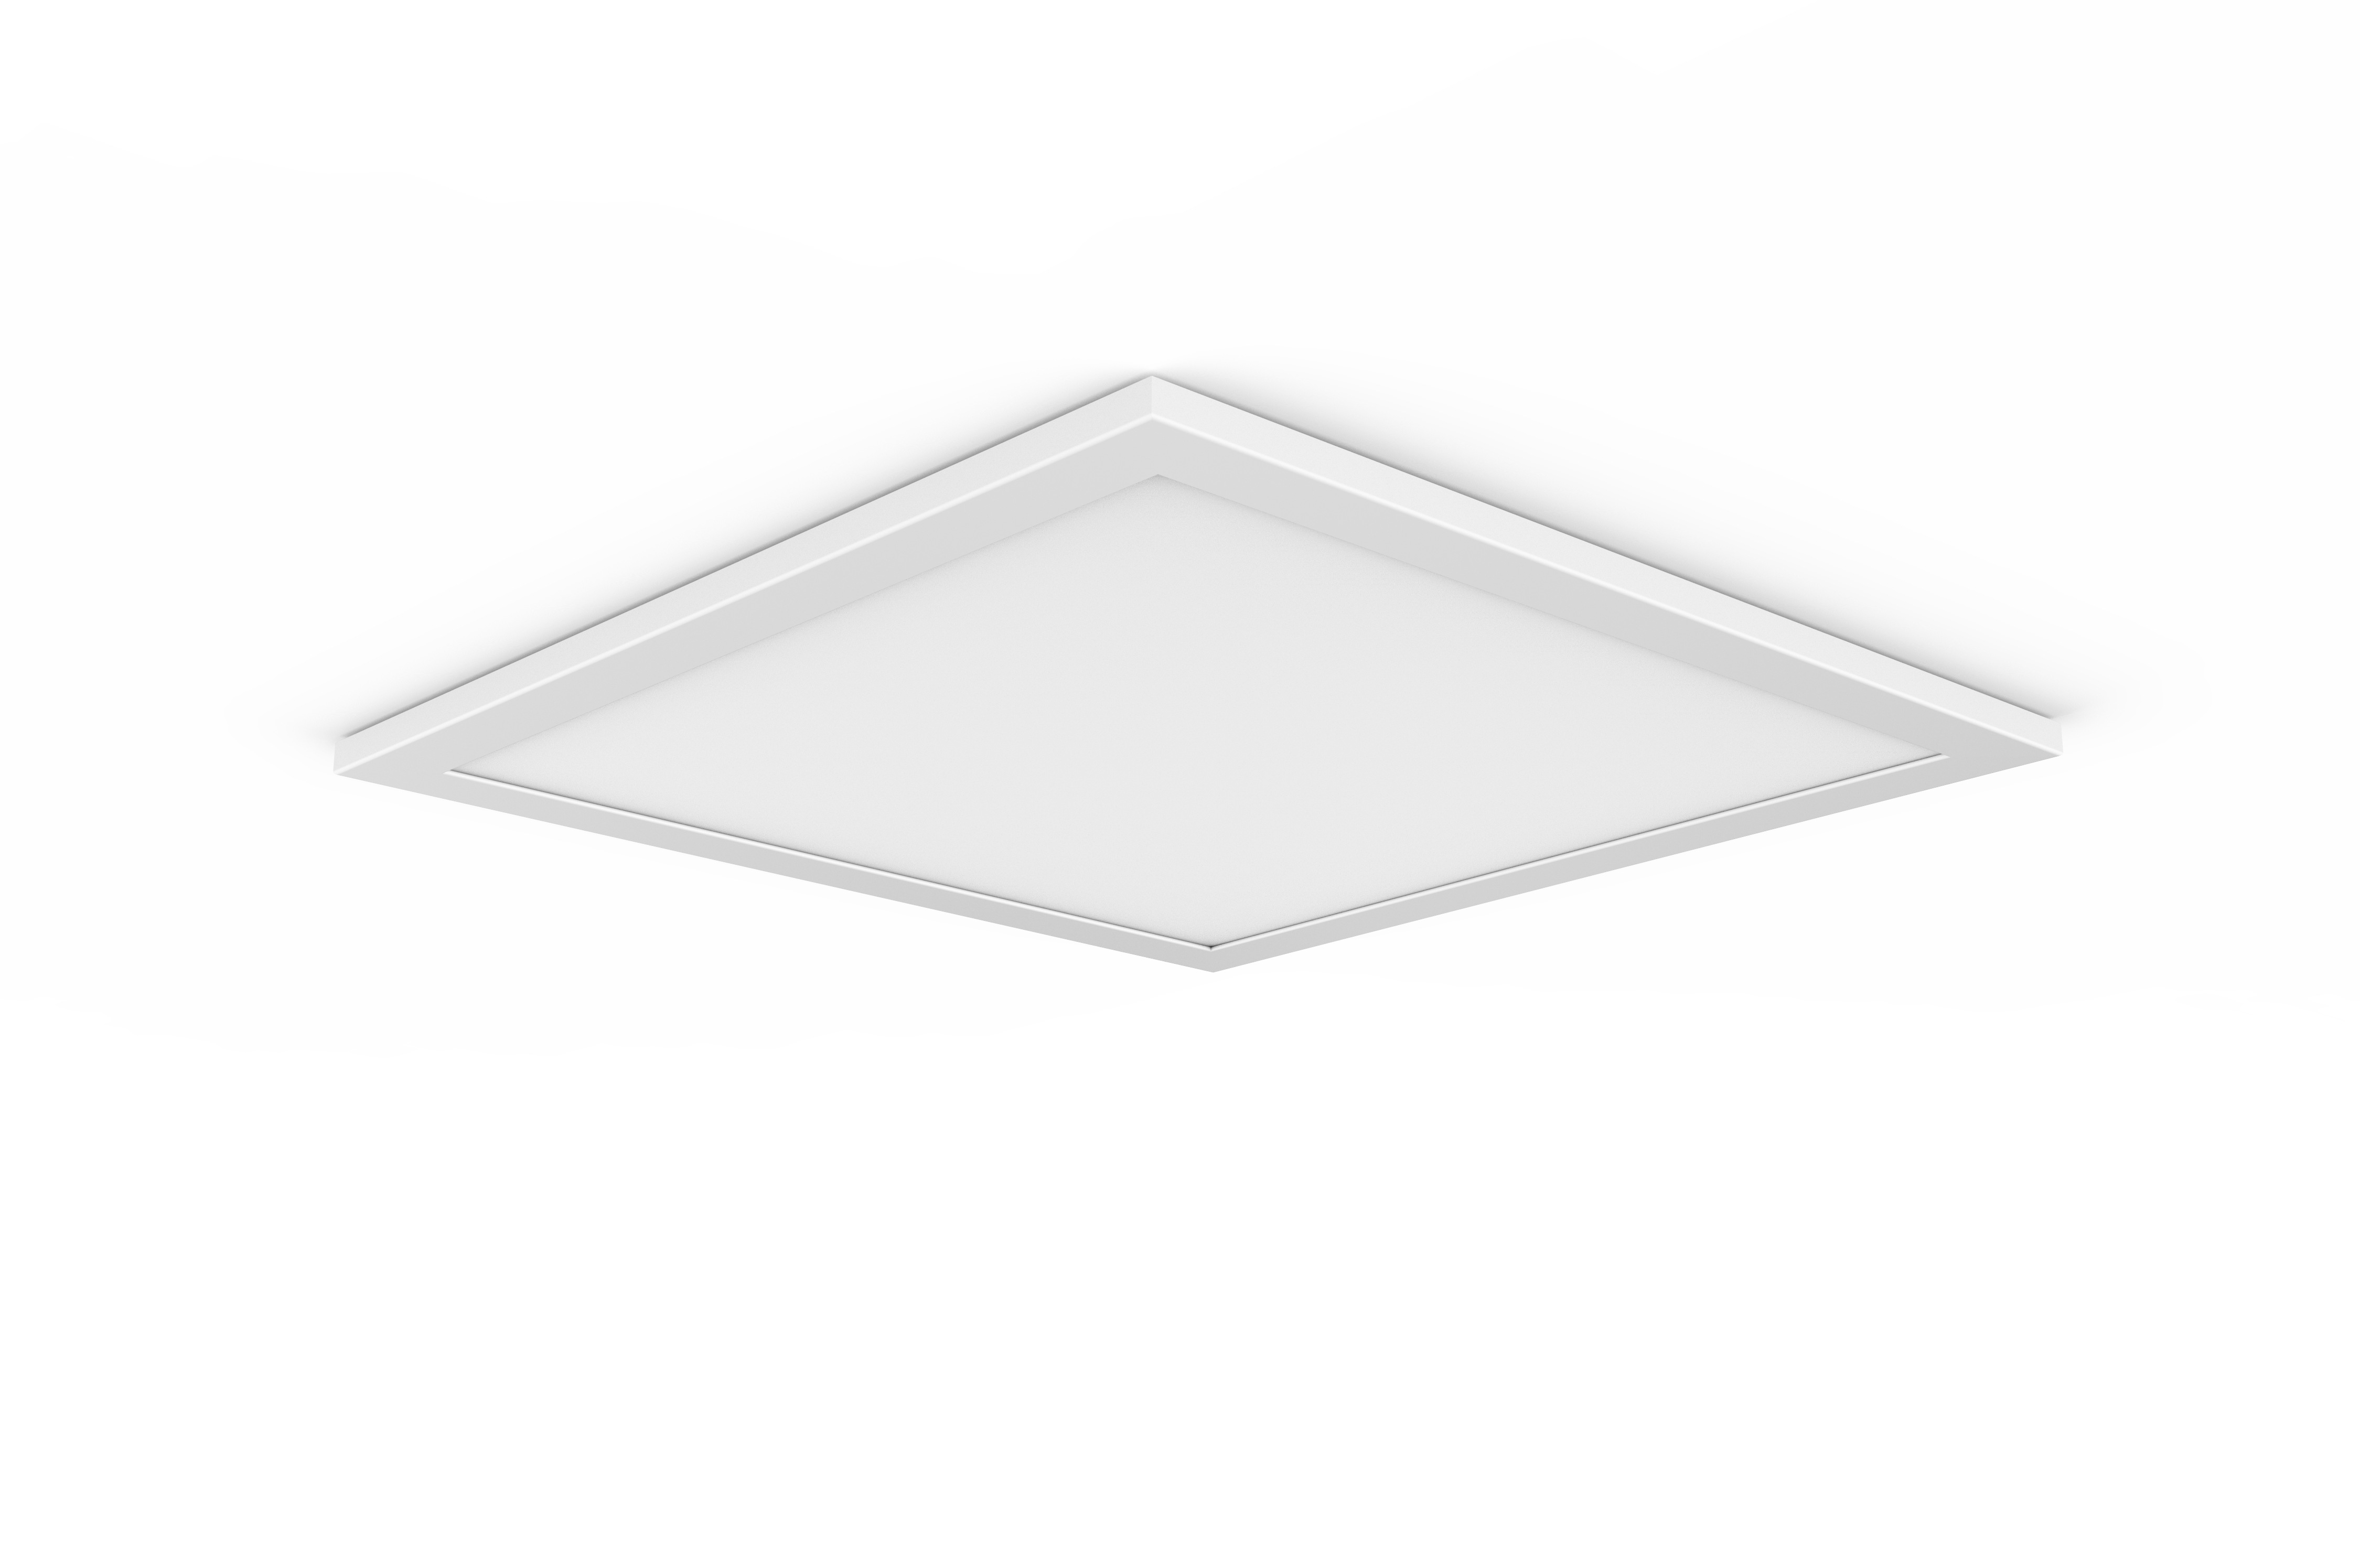 How to choose LED panel light? 